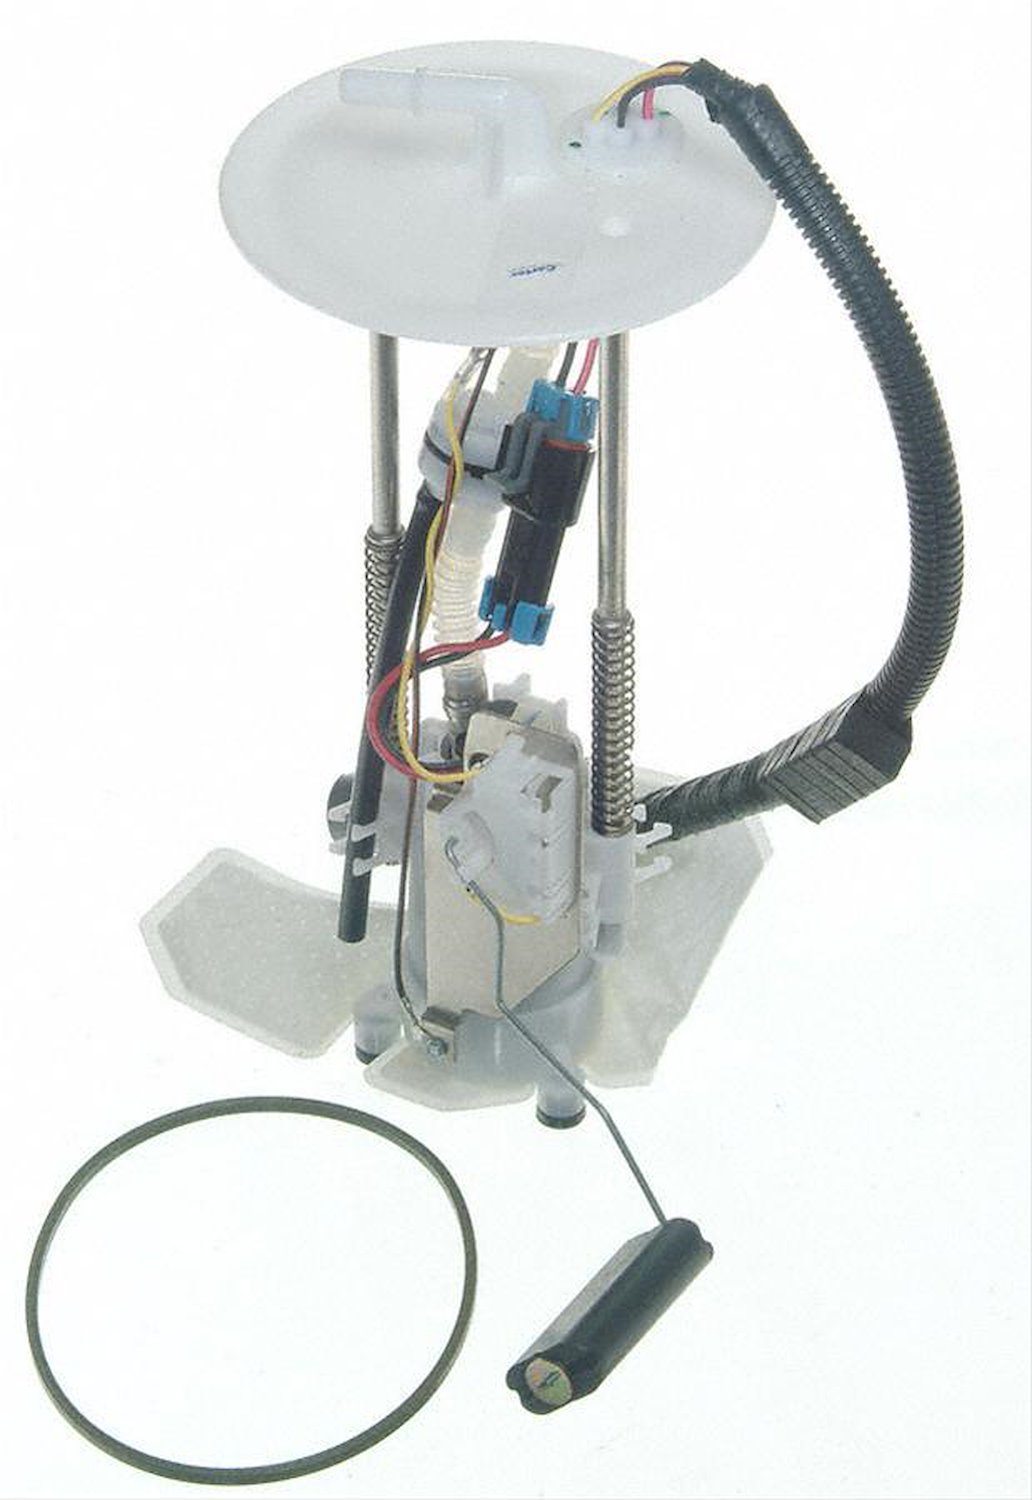 OE Ford Replacement Electric Fuel Pump Module Assembly 2004-05 Ford Explorer 4.0L